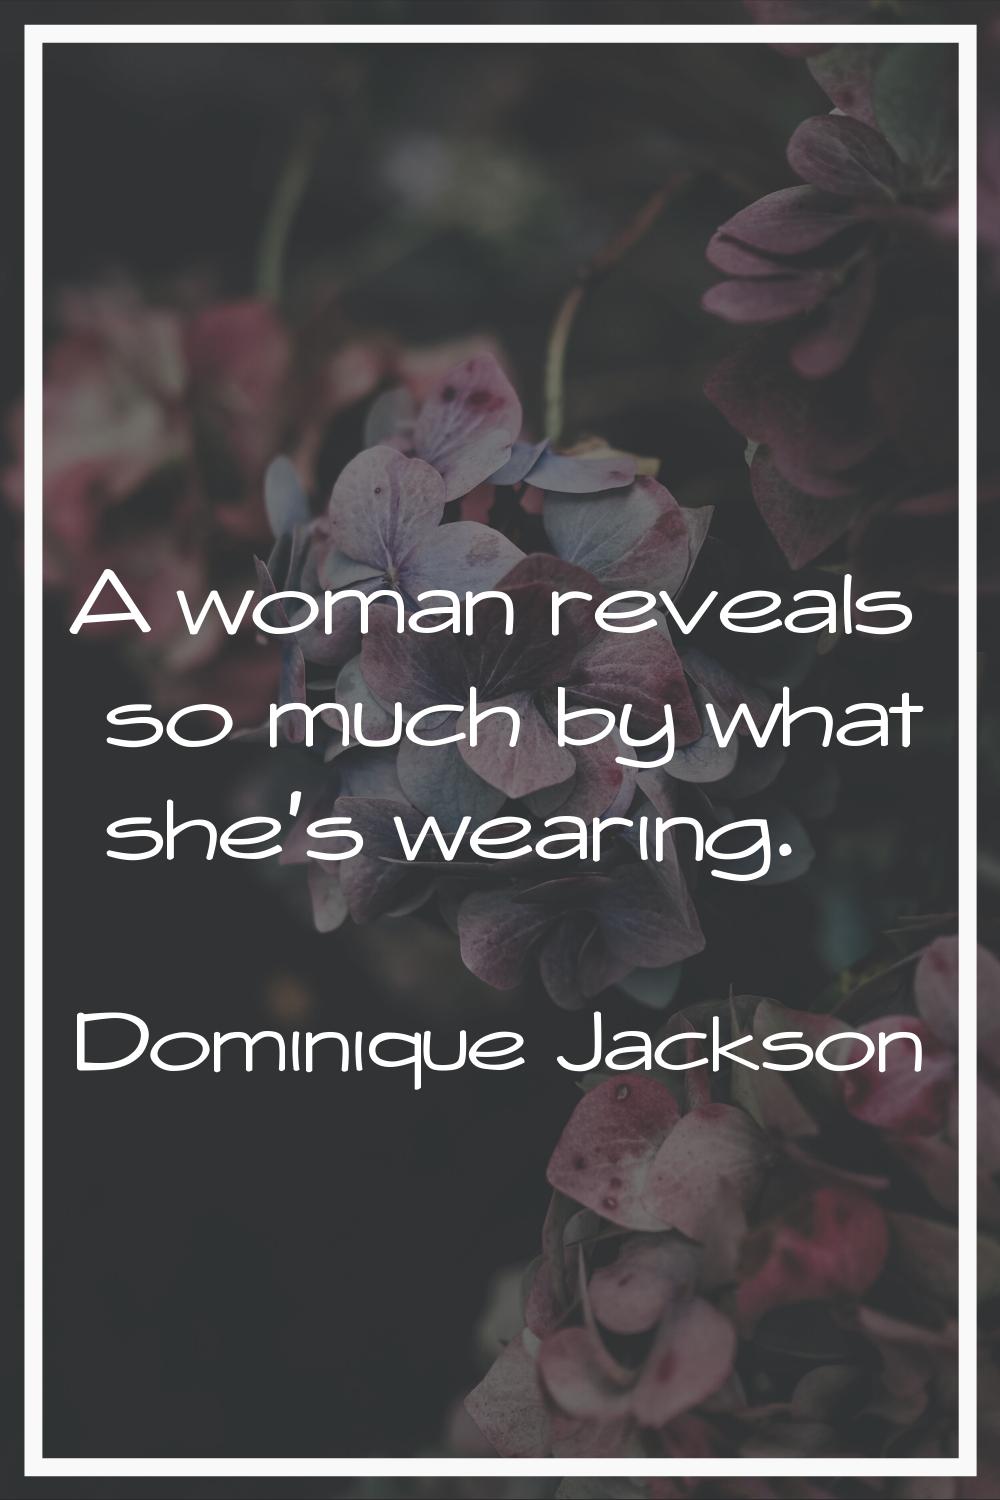 A woman reveals so much by what she's wearing.